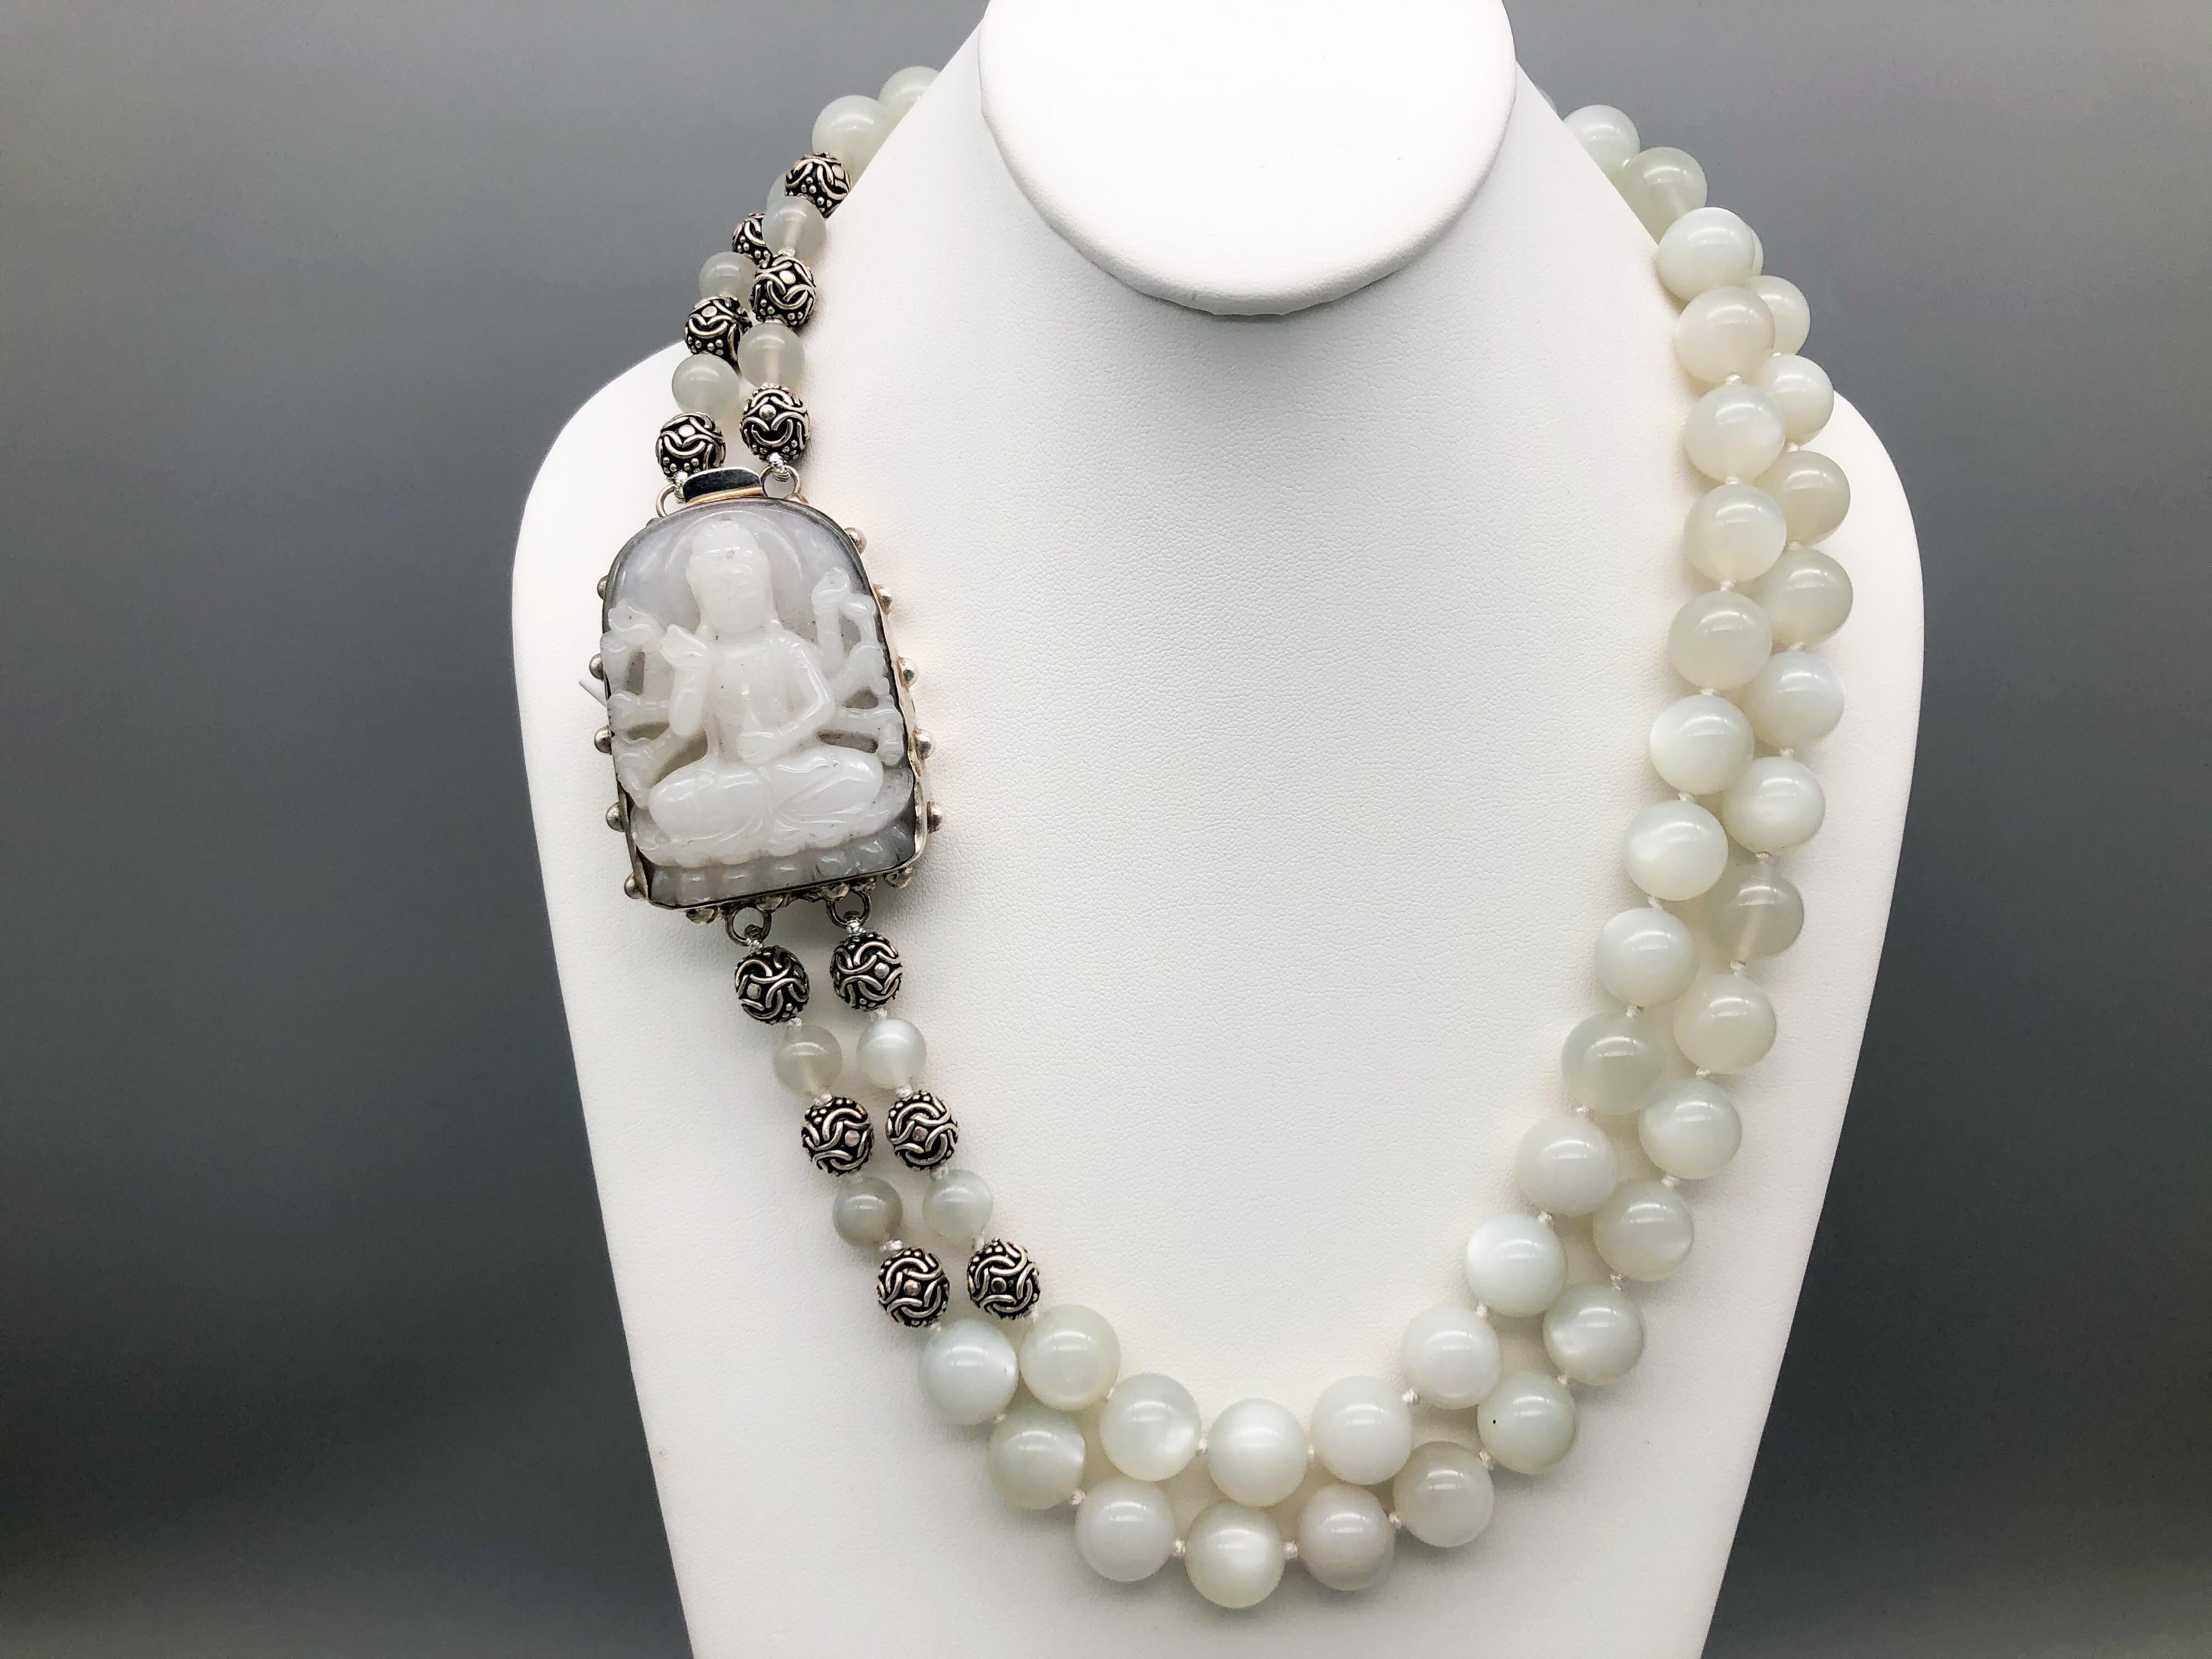 One-of-a-Kind
The beautiful Goddess of Compassion Guan Yin carved from Moonstone sits regally on her lotus leaf, her many arms reaching out to give help, surrounded by a double strand of shimmering 14 mm Moonstone and Sterling Silver. The heavily